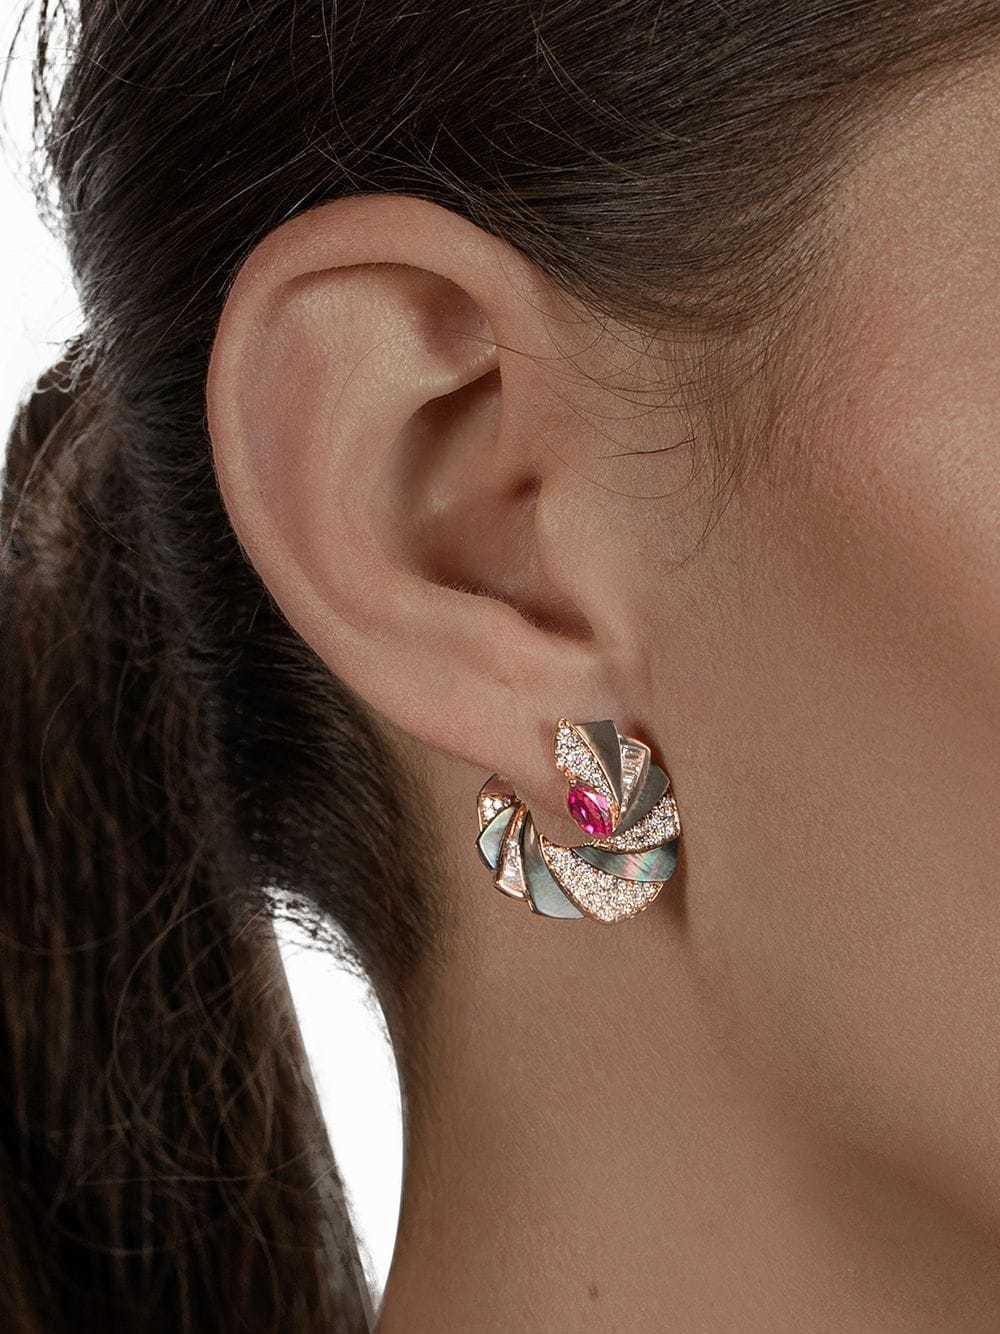 Fashionable and Elegant Crystal Earrings Jewelry